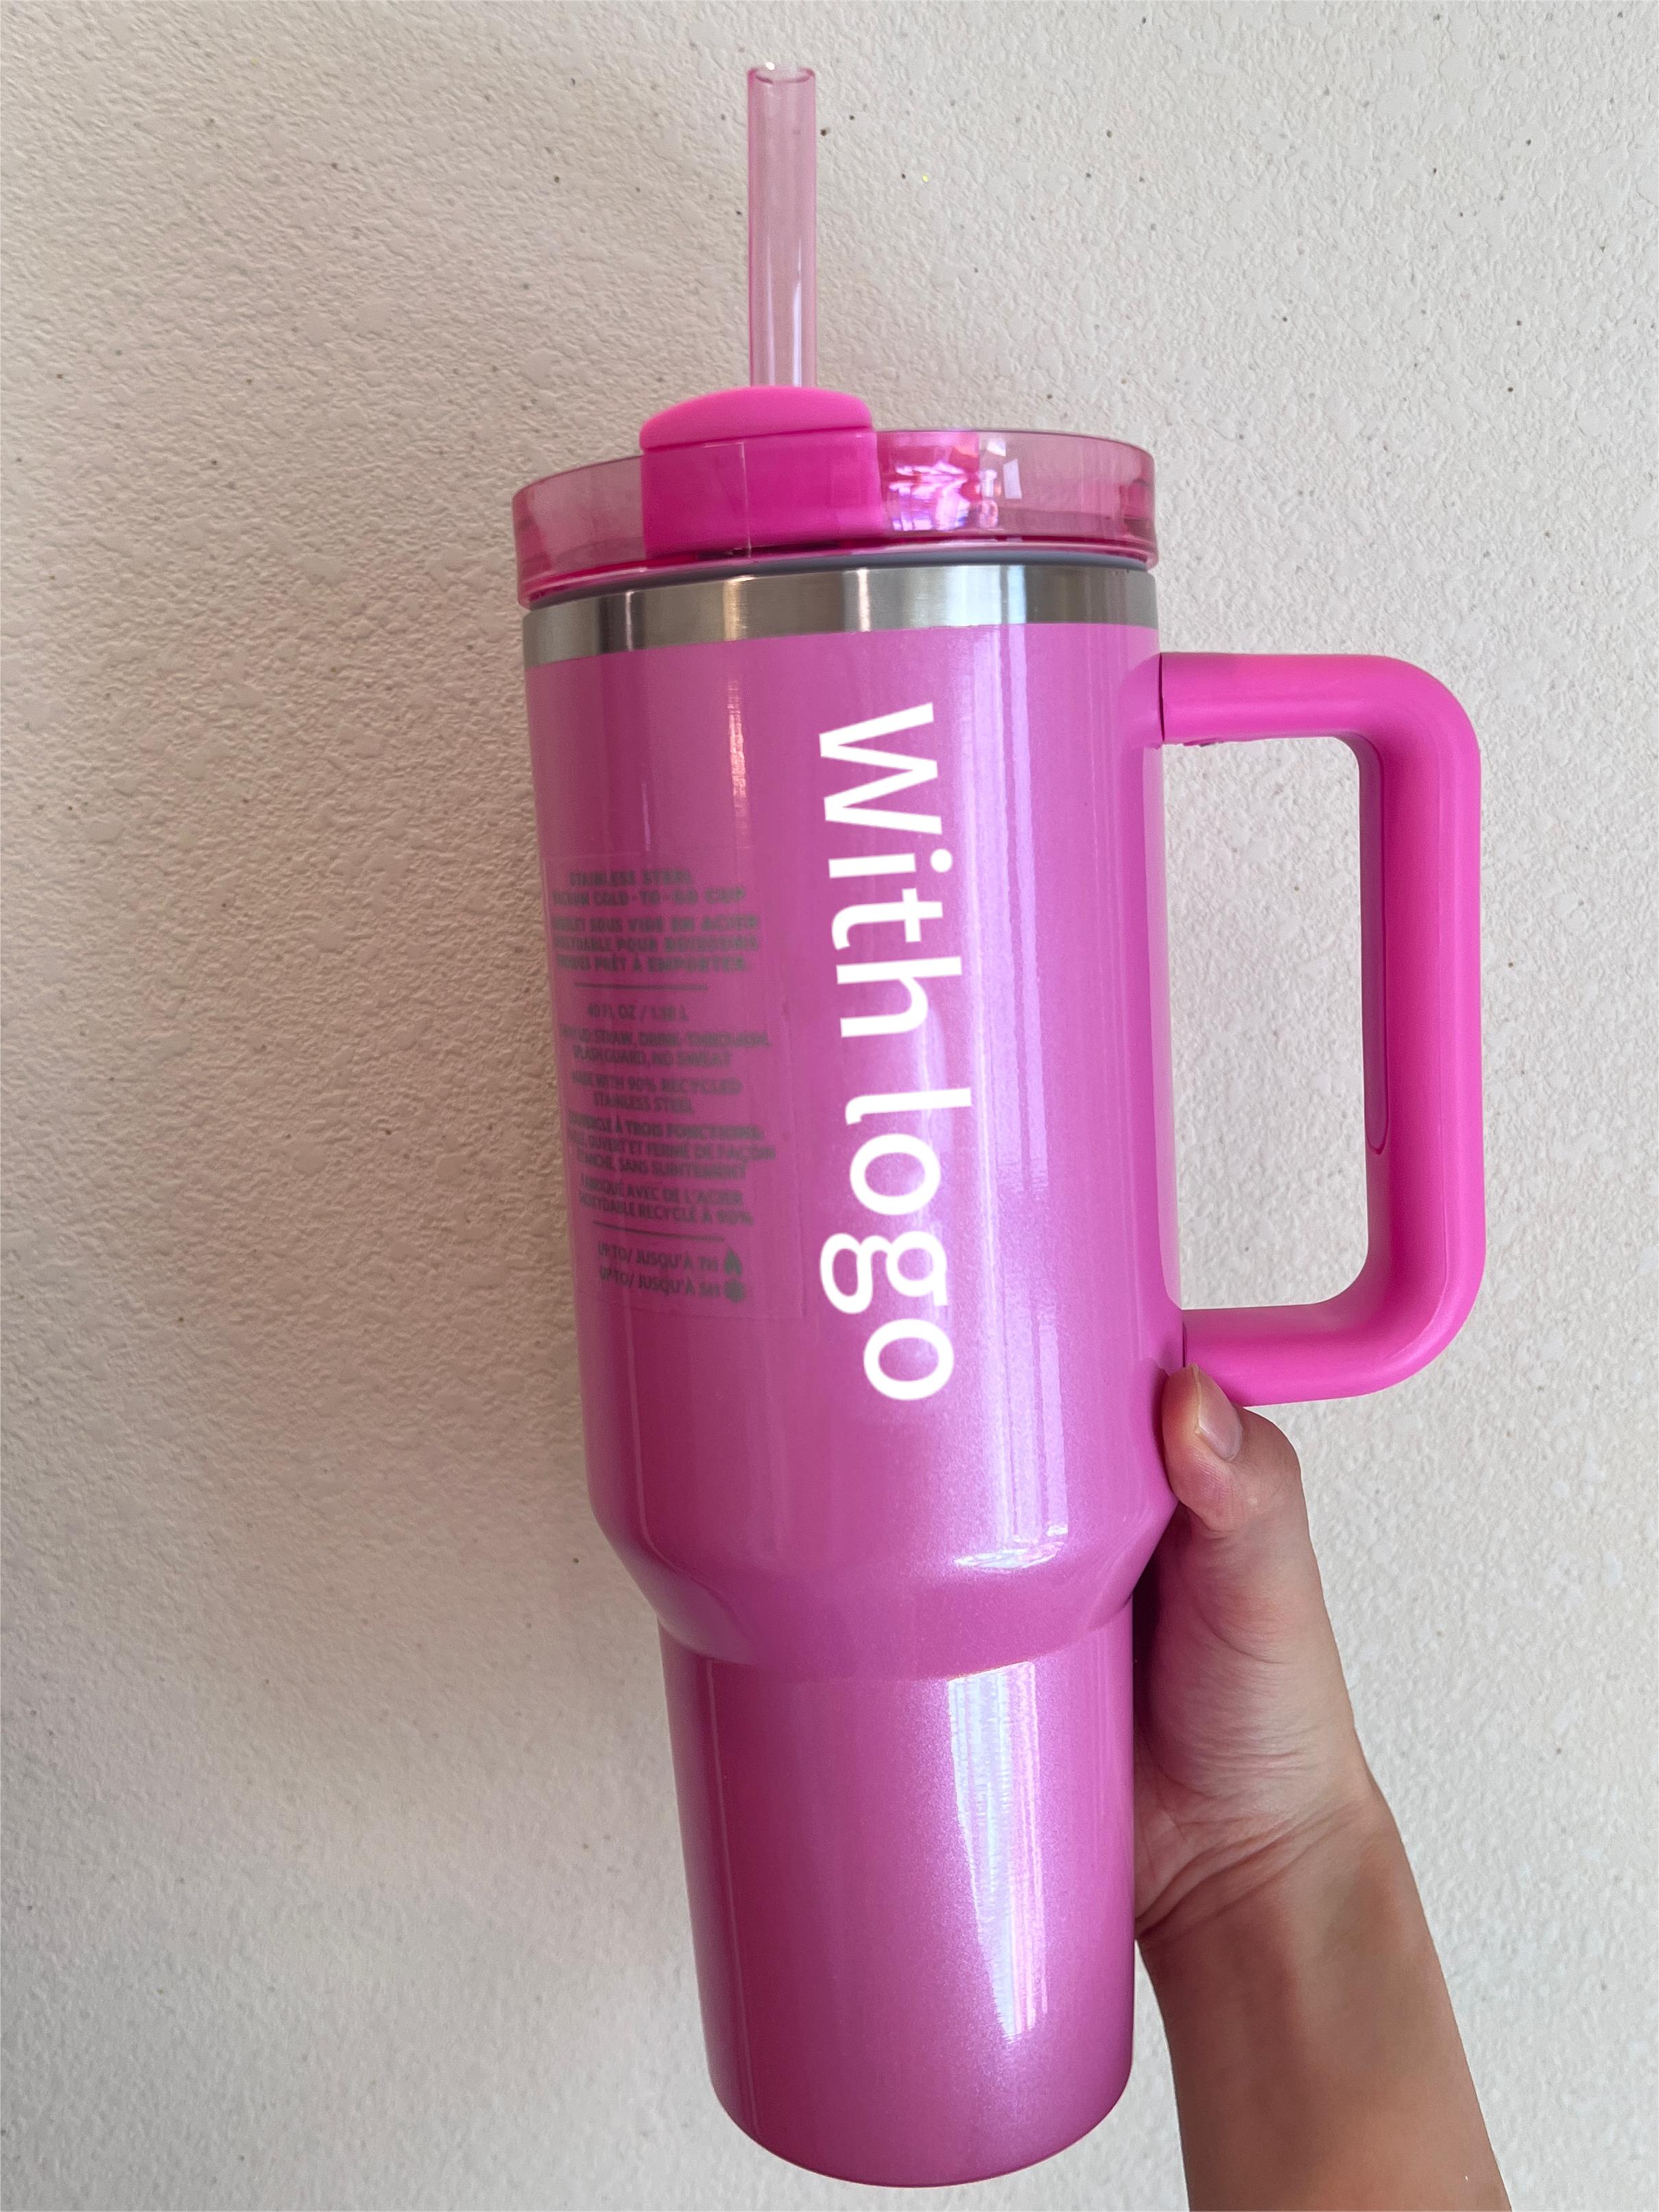 40oz Quencher exactly same 1:1Tumblers Cosmo Parade Flamingo Co-Branded Valentine's Day Gift Cup 40oz Stainless Steel FlowState Quencher Pink Lid Straw Car Mug